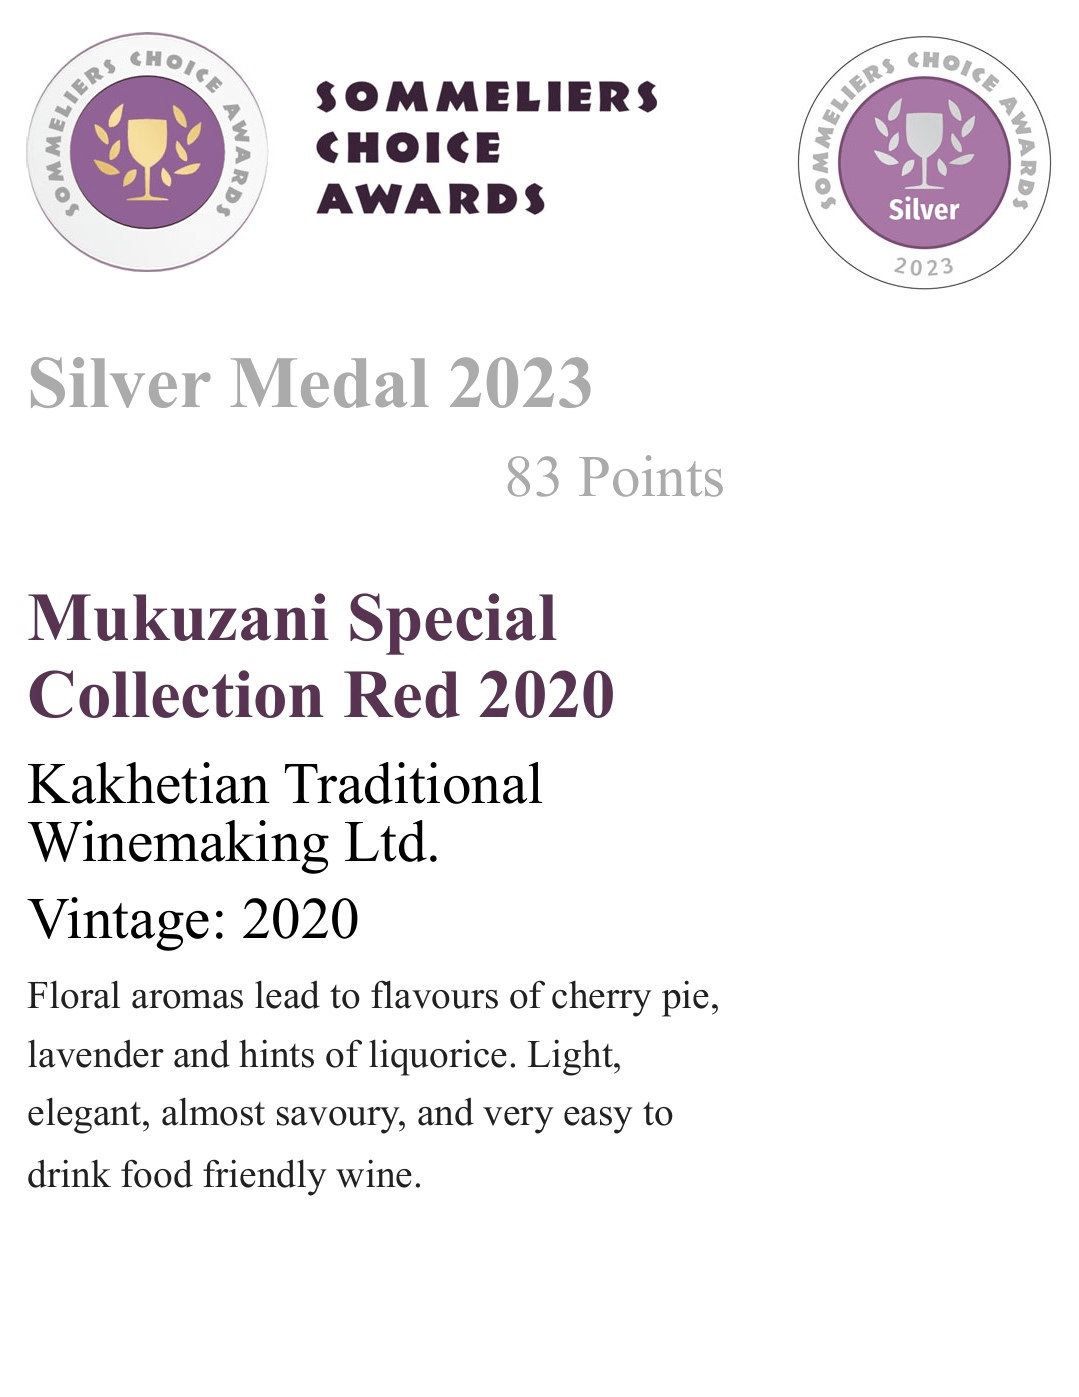 Sommeliers Choice Awards mukuzani specioal collection_page-0001-min